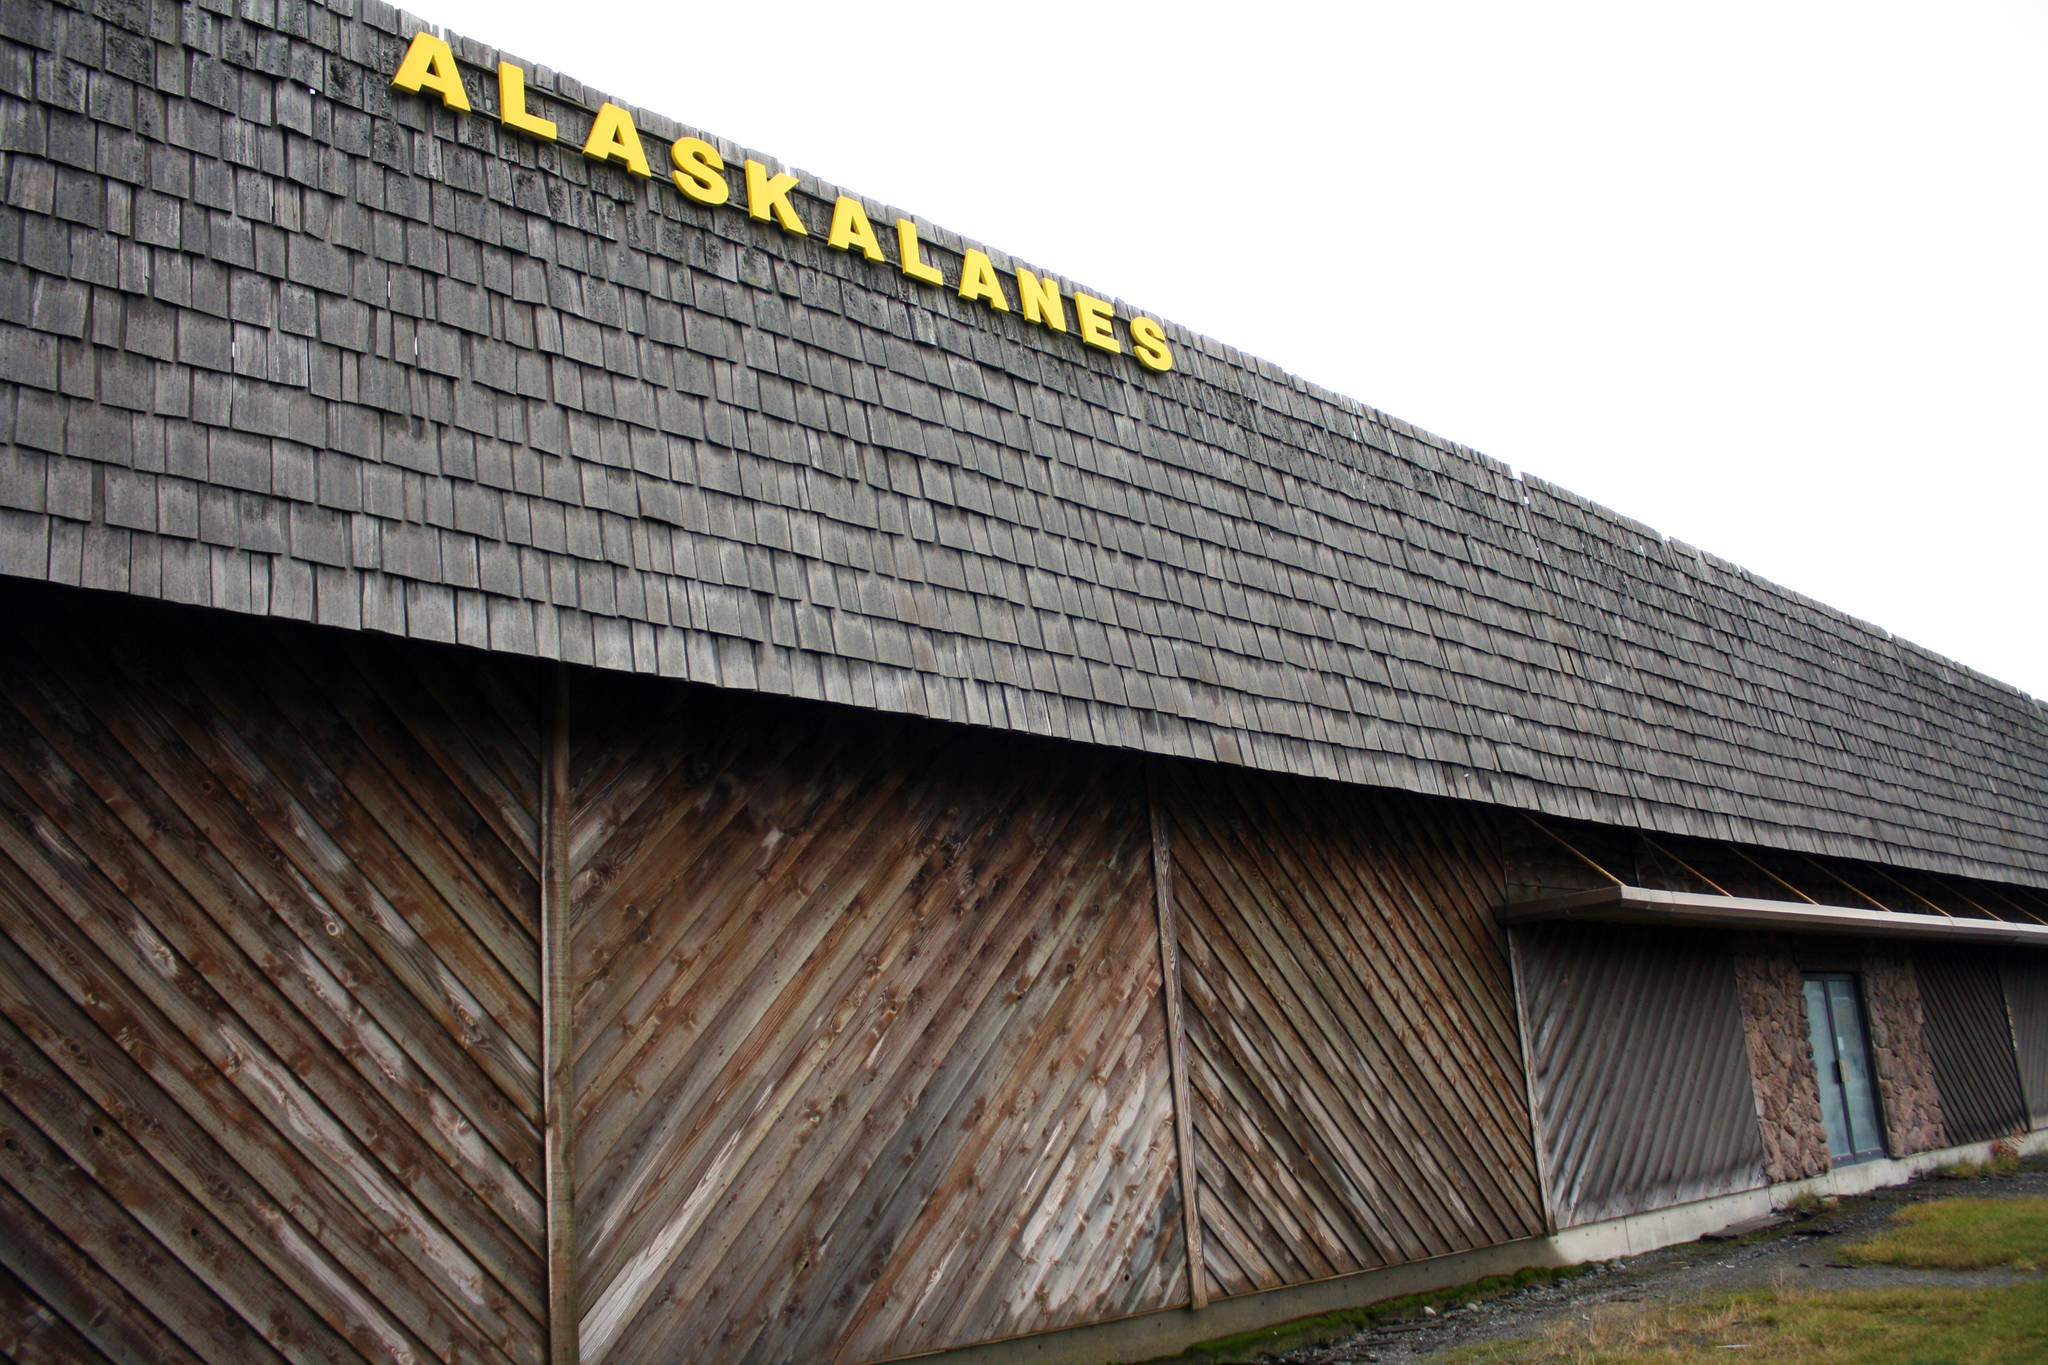 Alaskalanes bowling alley is photographed on Thursday in Kenai. New owners have asked Kenai City Council to help reopen the business, which closed in 2015. (Photo by Erin Thompson/Peninsula Clarion)